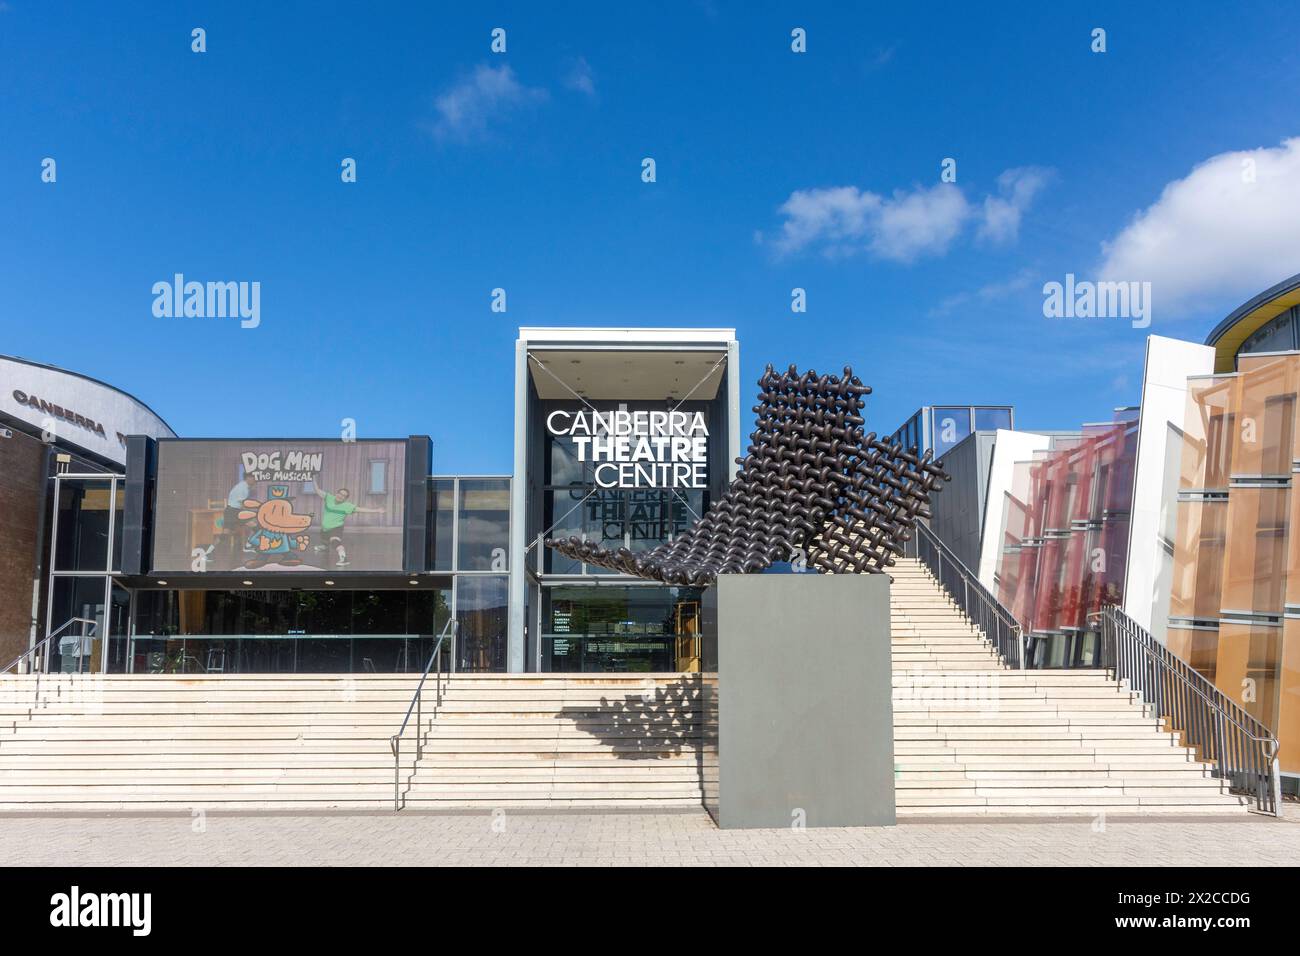 Canberra Theatre Centre, Civic Square, Central Canberra, Canberra, Australian Capital Territory, Australien Stockfoto